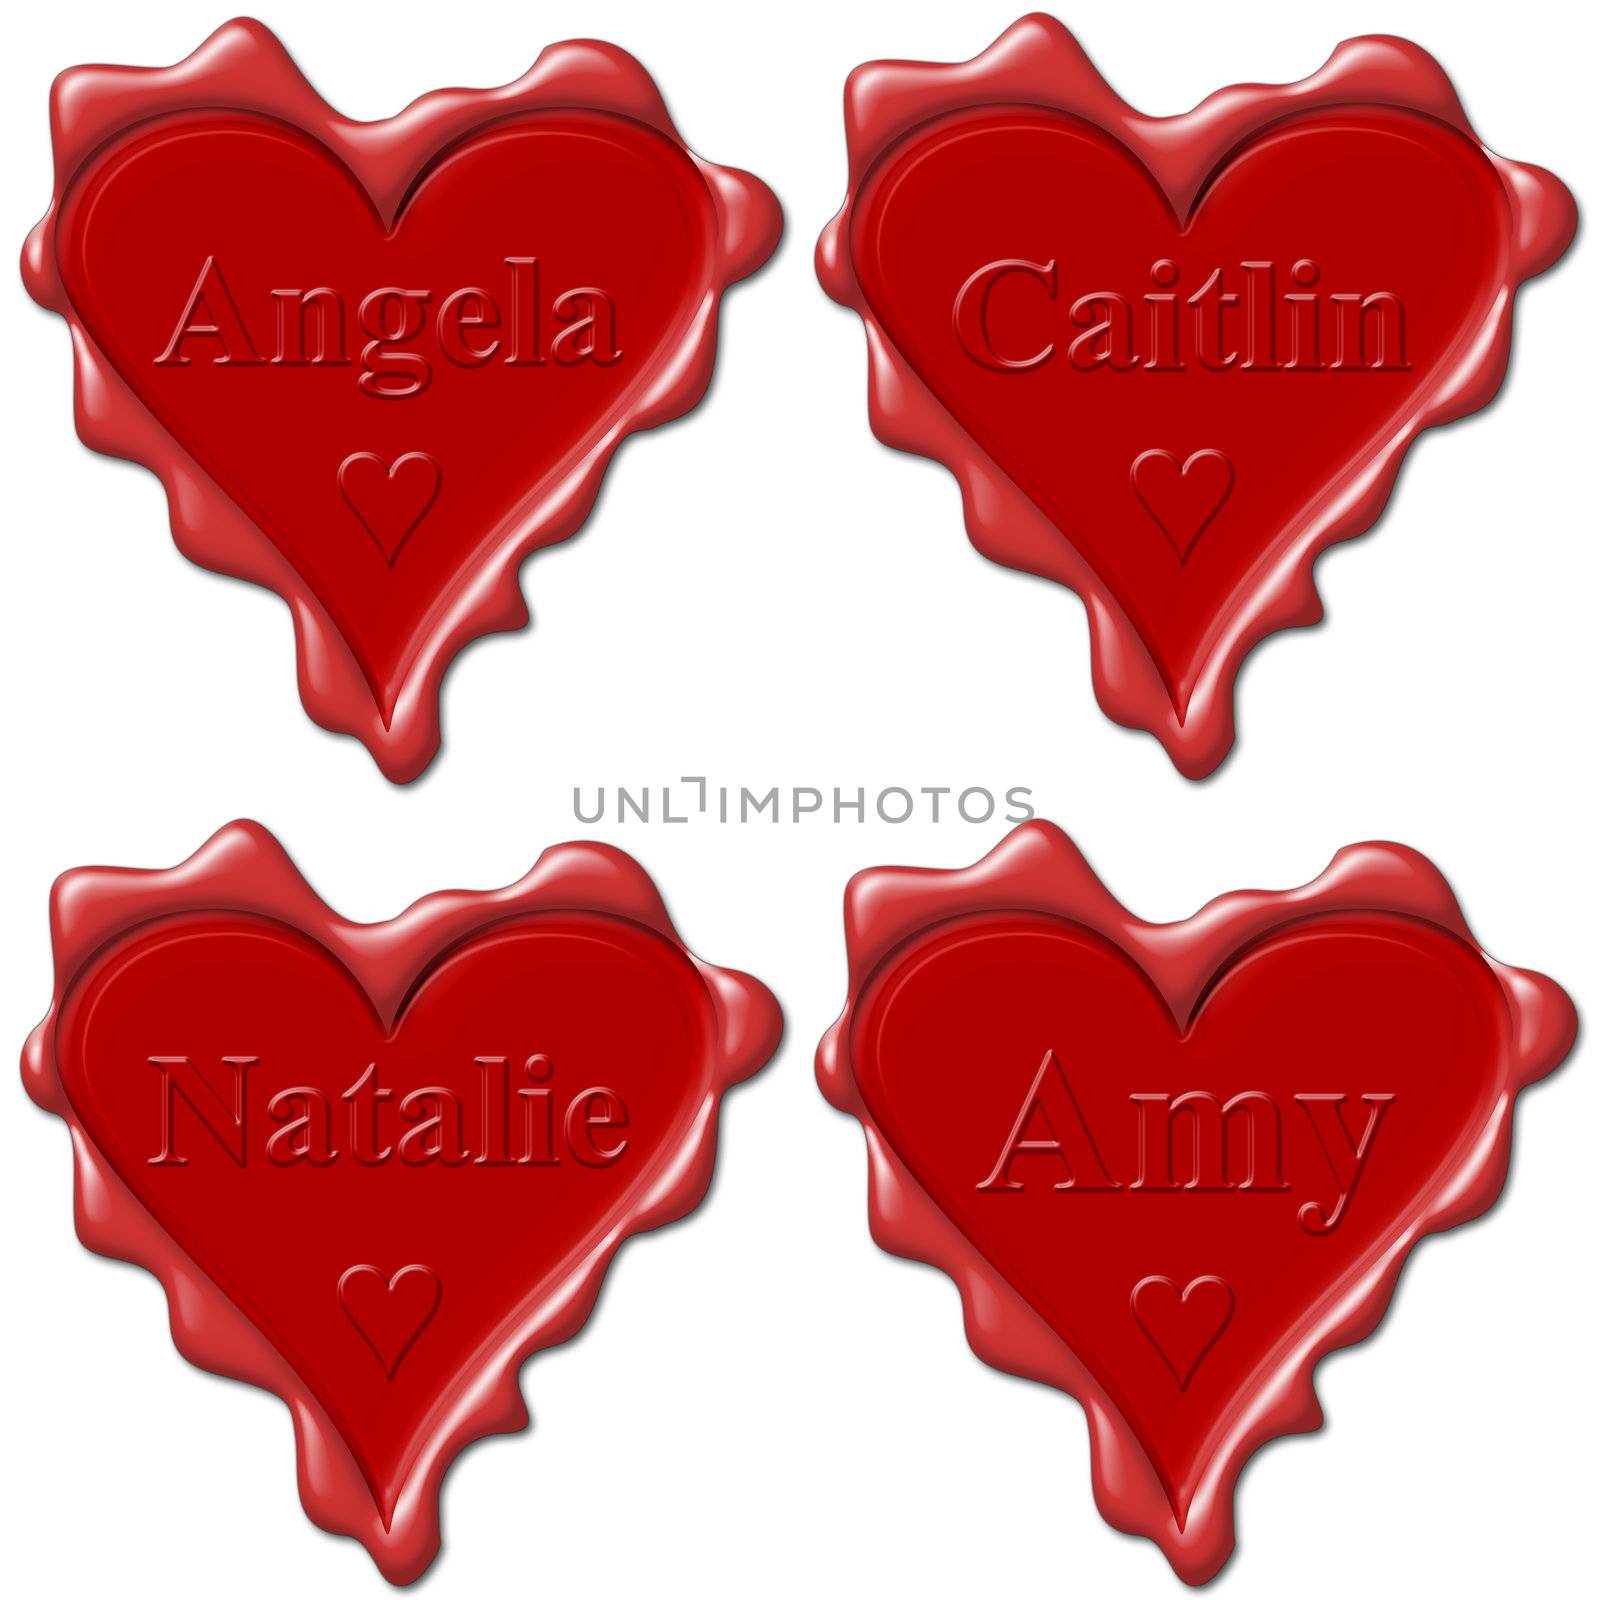 Valentine love hearts with names: Angela, Caitlin, Natalie, Amy by mozzyb